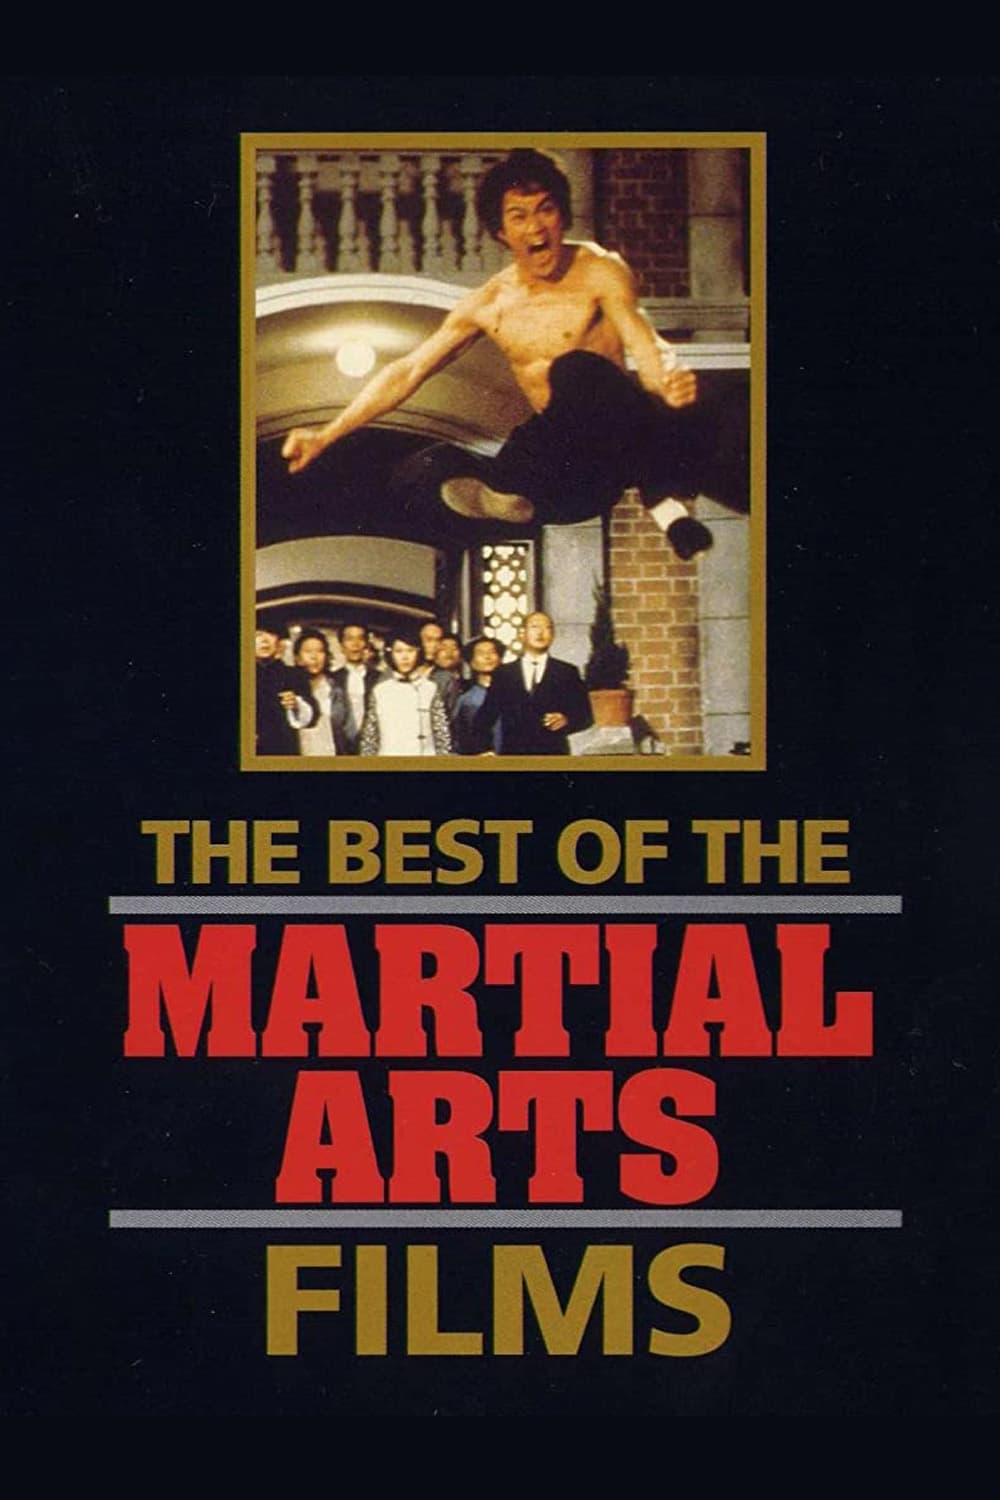 EN - The Best Of The Martial Arts Films (1990) JACKIE CHAN (ENG)